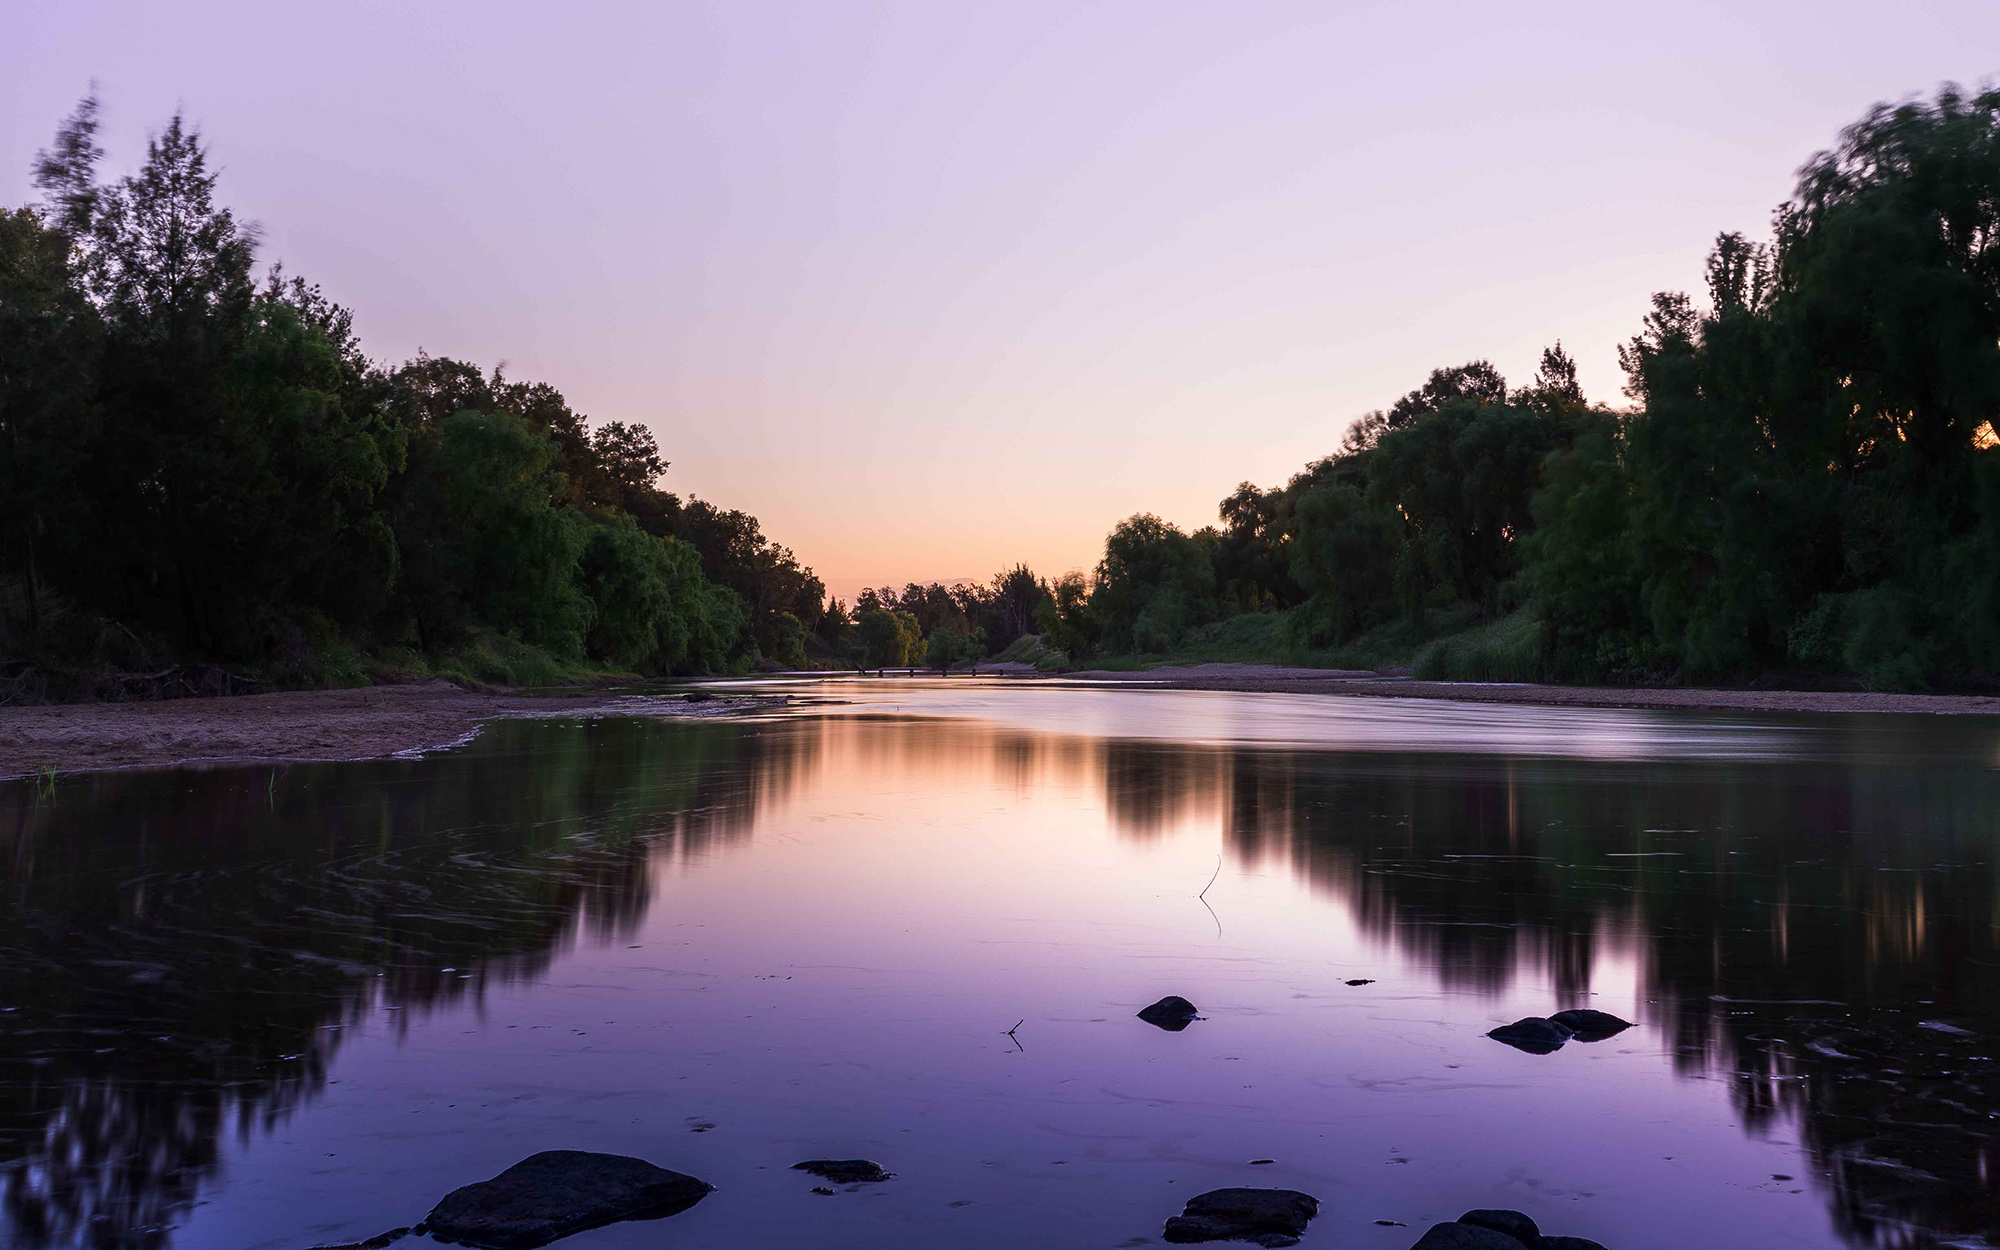 Purple sunset reflecting in the water at Aberglasslyn River Bank, New South Wales, Australia.